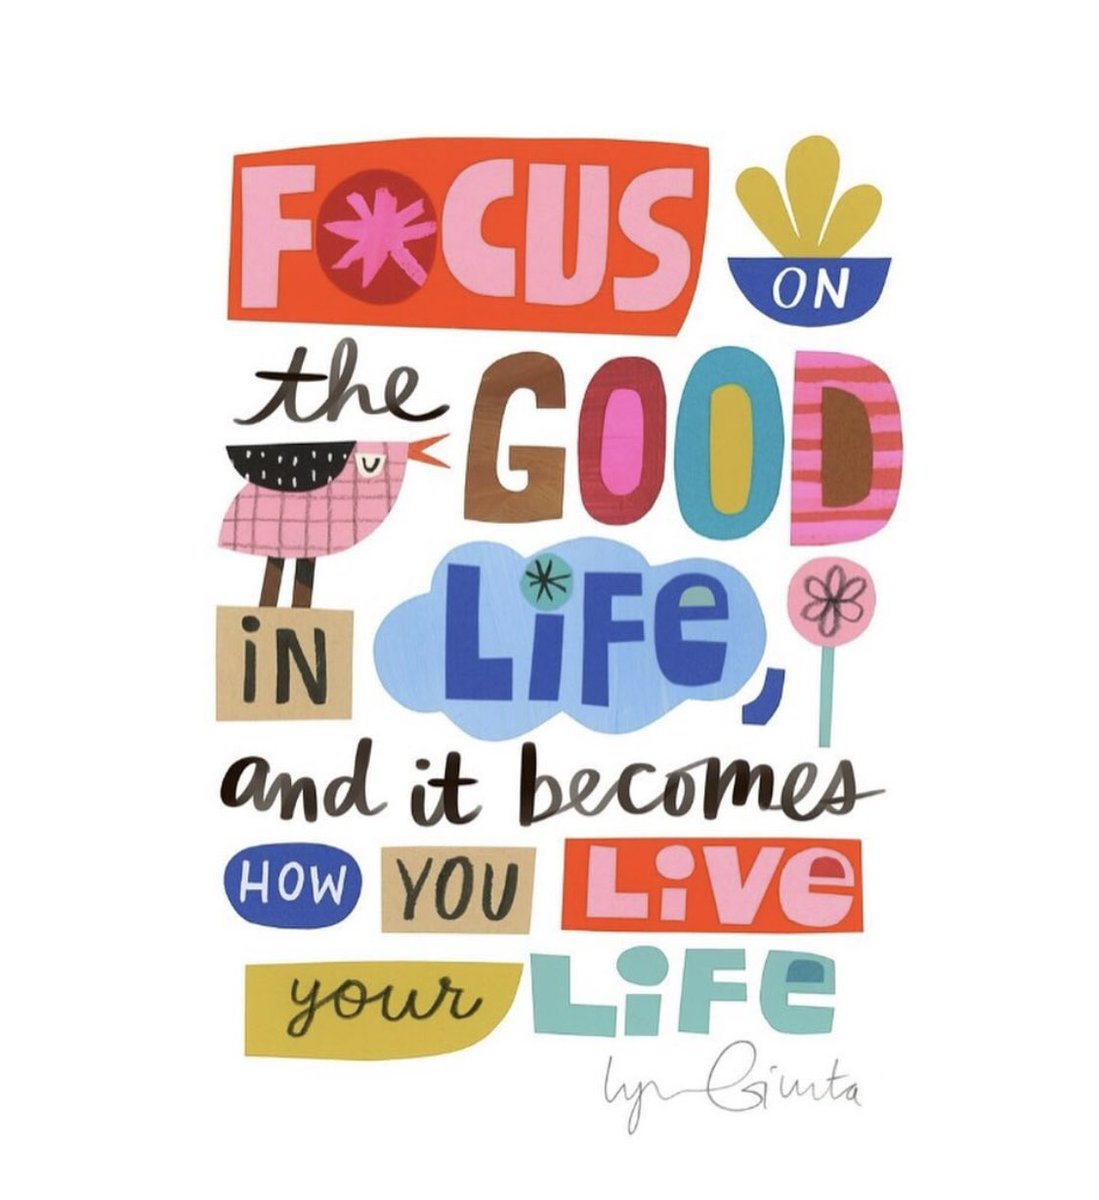 When we focus on the good in life it becomes how we live our life Image: instagram.com/lynn_giunta